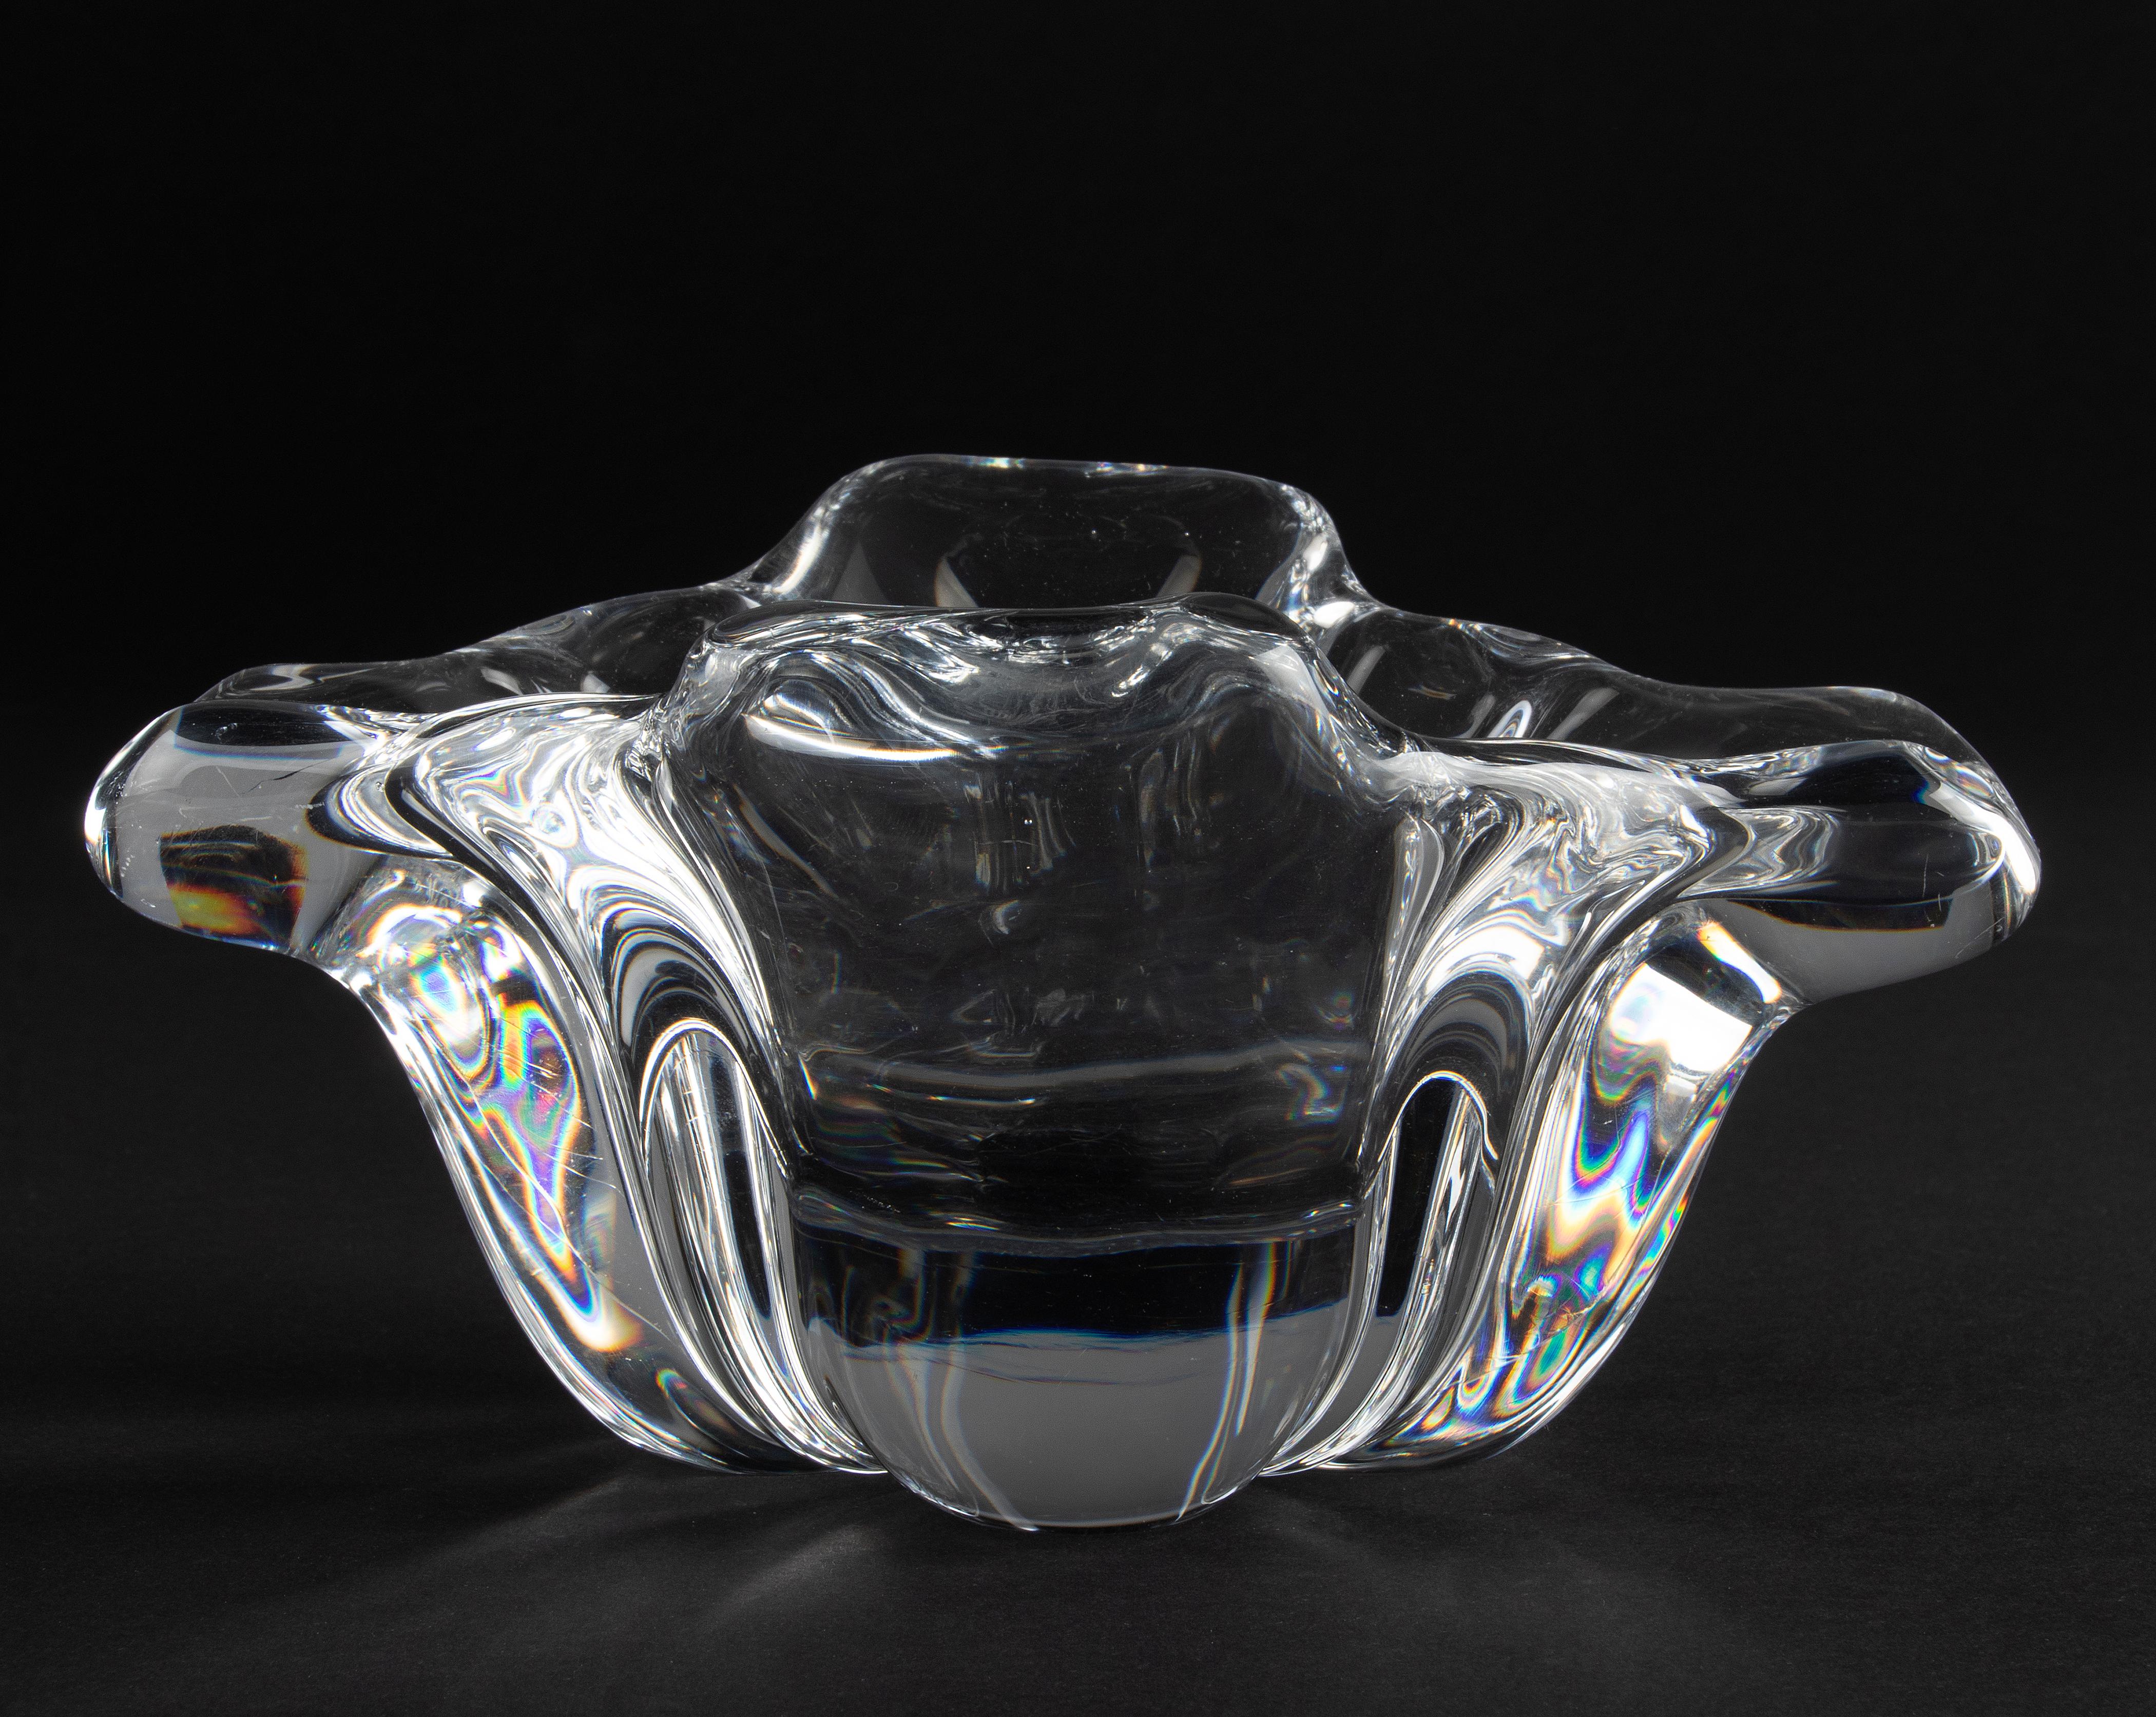 Beautiful crystal bowl from the Belgian brand Val Saint Lambert. The bowl is made of heavy / thick-walled crystal, very clear in color and has a beautiful free shape. The bowl is signed on the bottom. In very good condition.